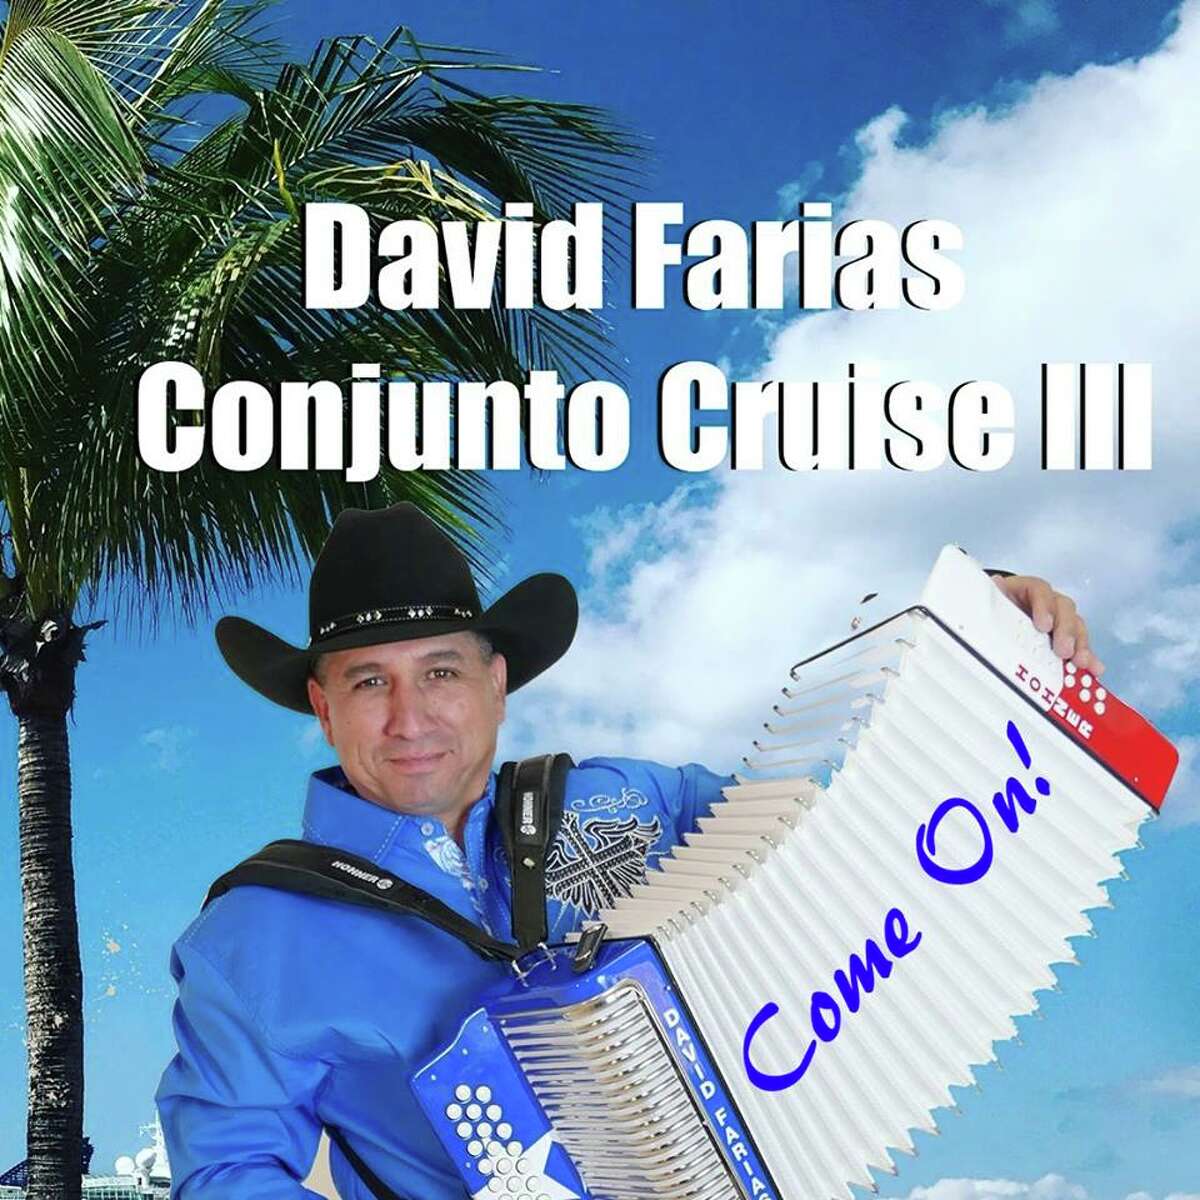 Tejano, conjuntothemed cruises with private concerts setting sail from